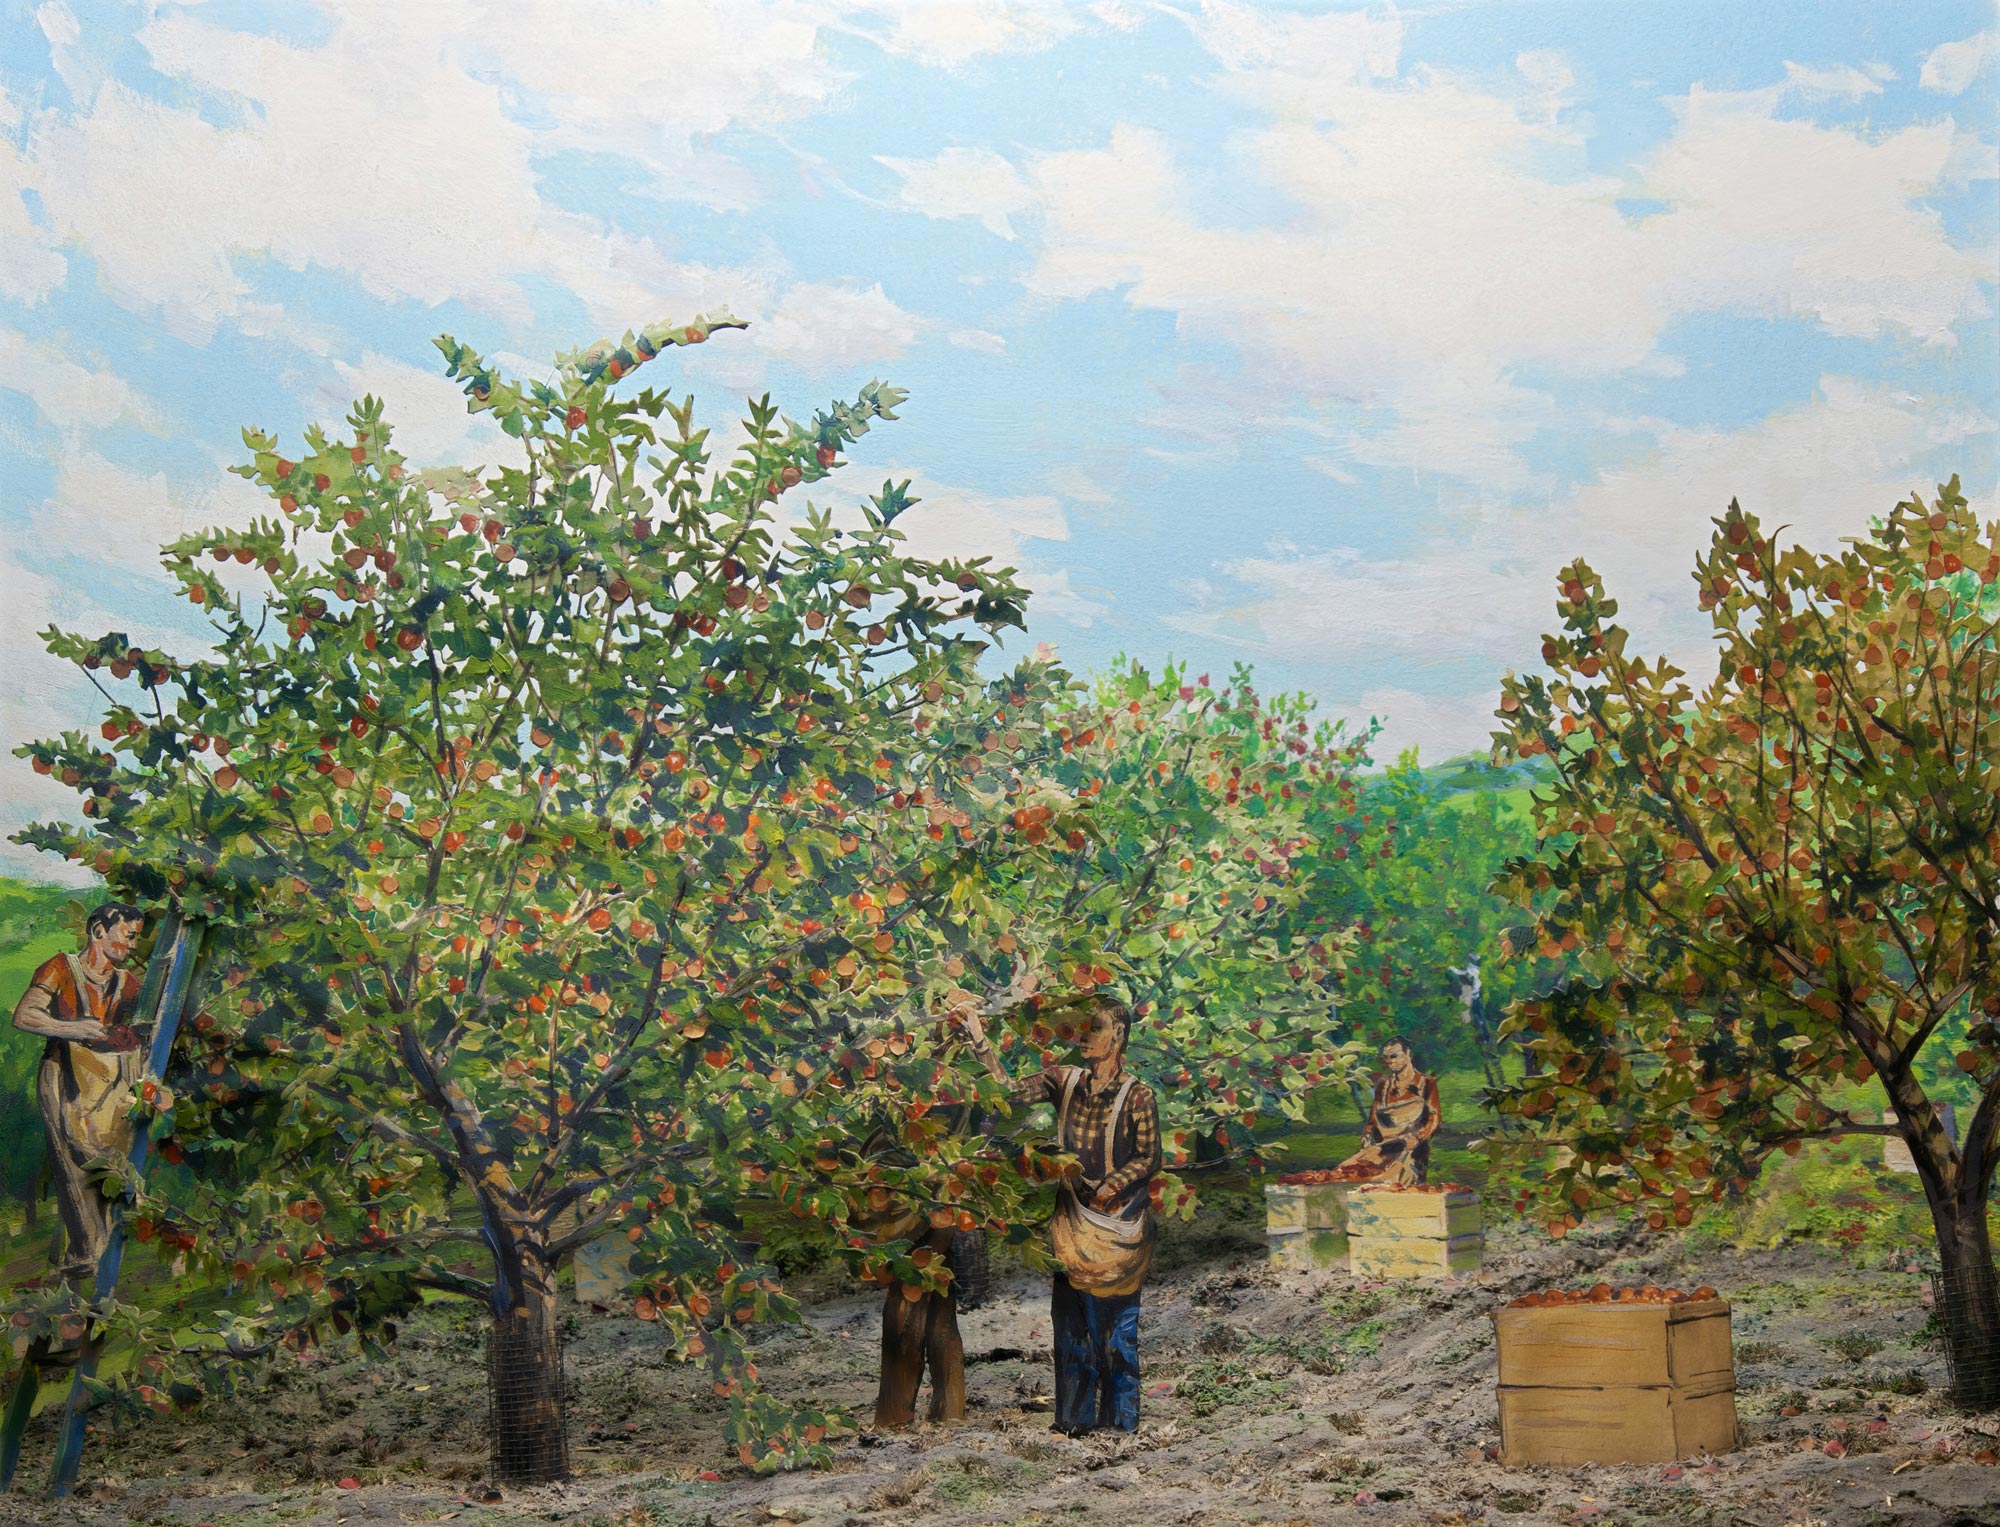 Diorama showing the harvest of an apple orchard.